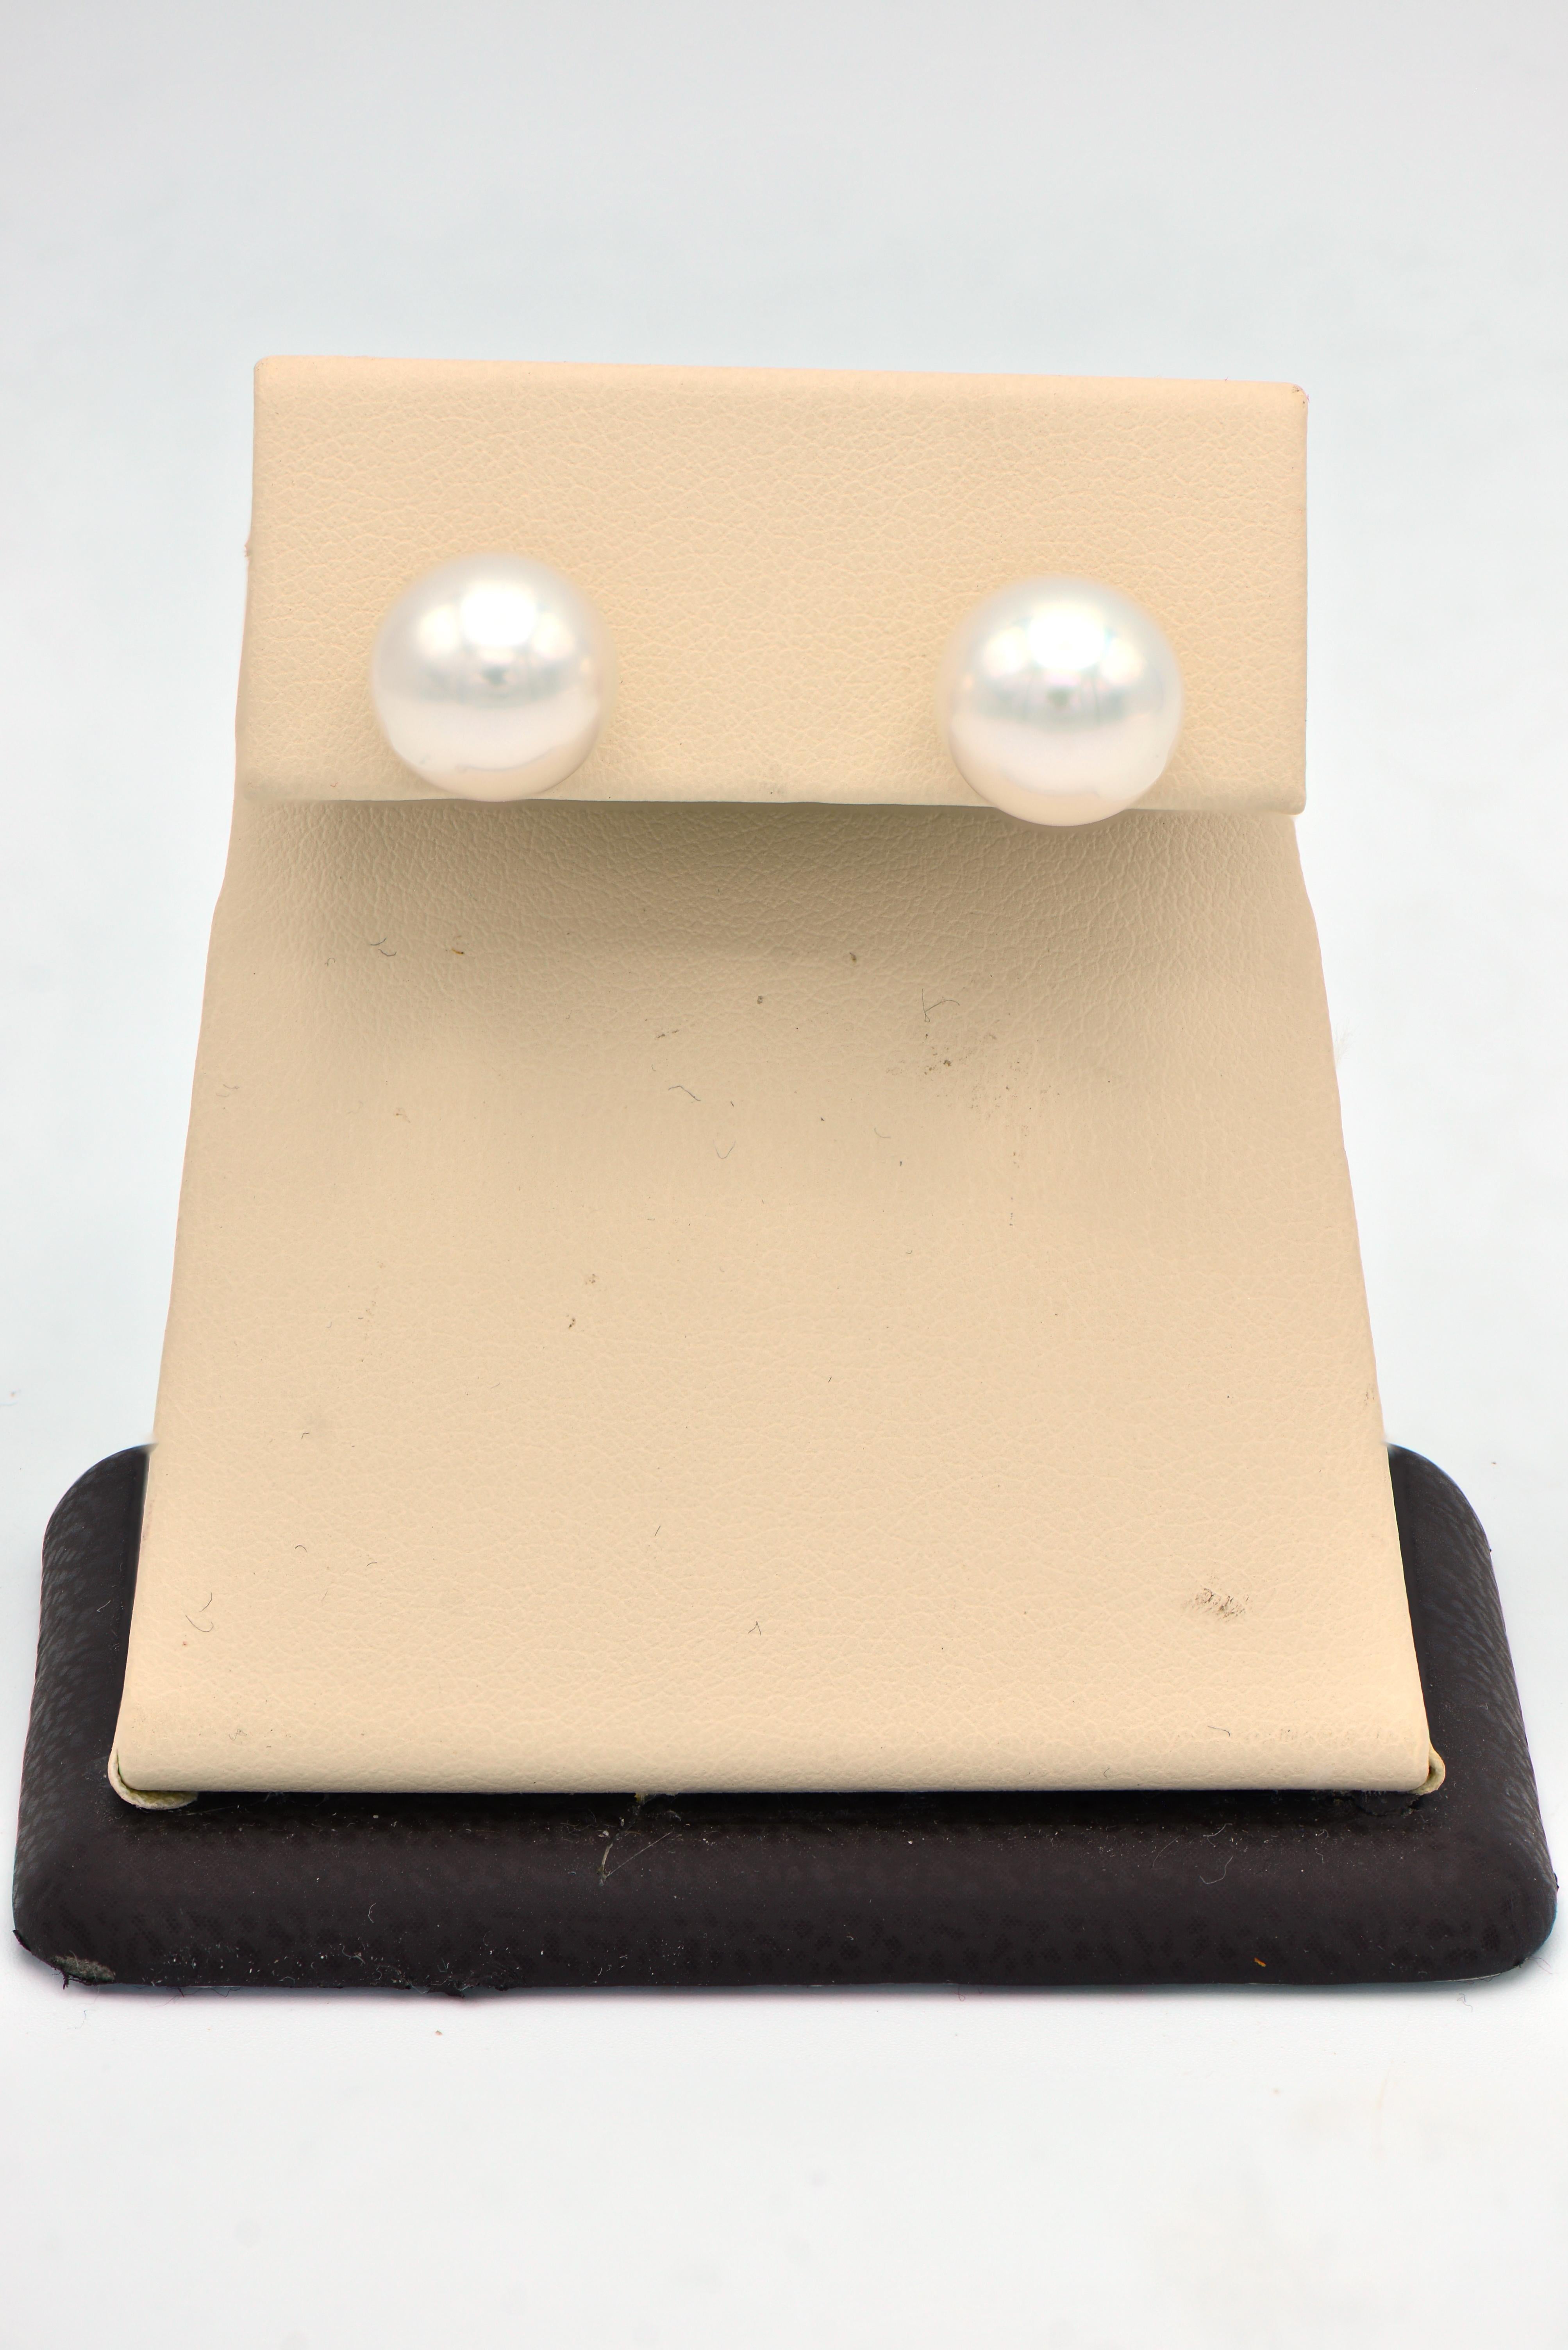 Round Cut 9-9.5mm South Sea Pearl Stud Earrings with 14 Karat White Gold Post and Backs For Sale